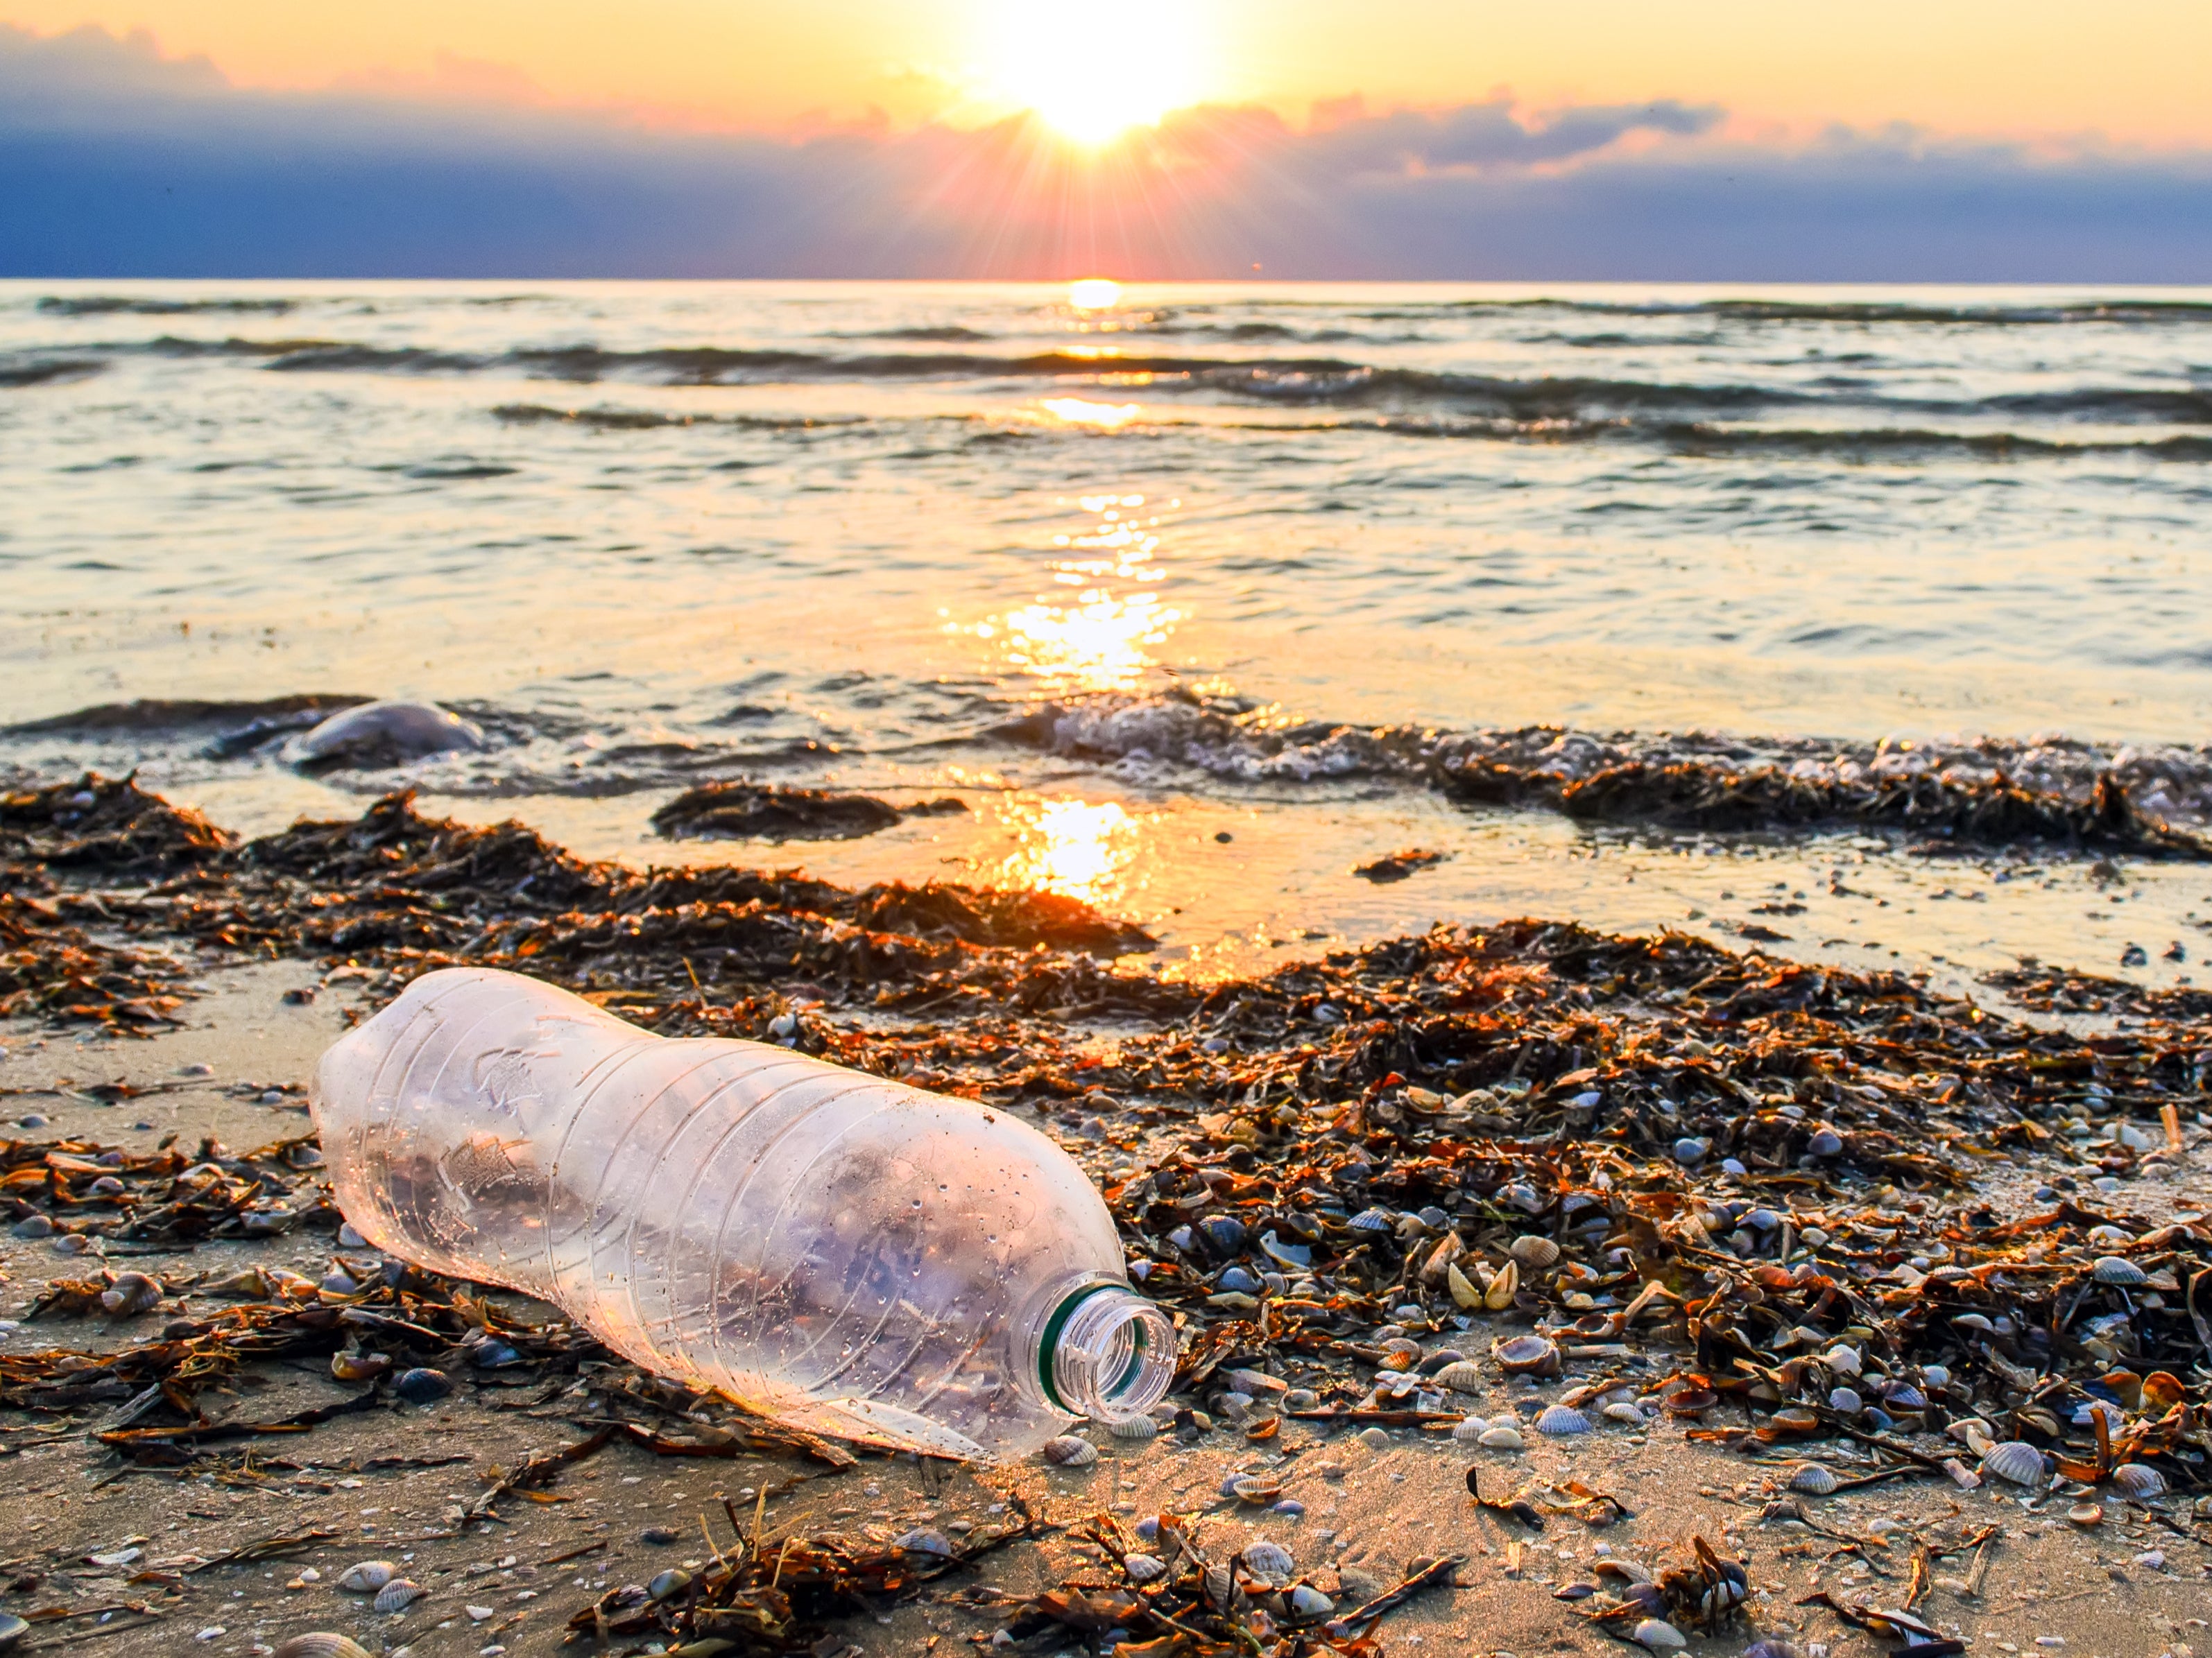 Estimates suggest there is currently 250,000 tonnes of plastic bobbing in open saltwater around the world